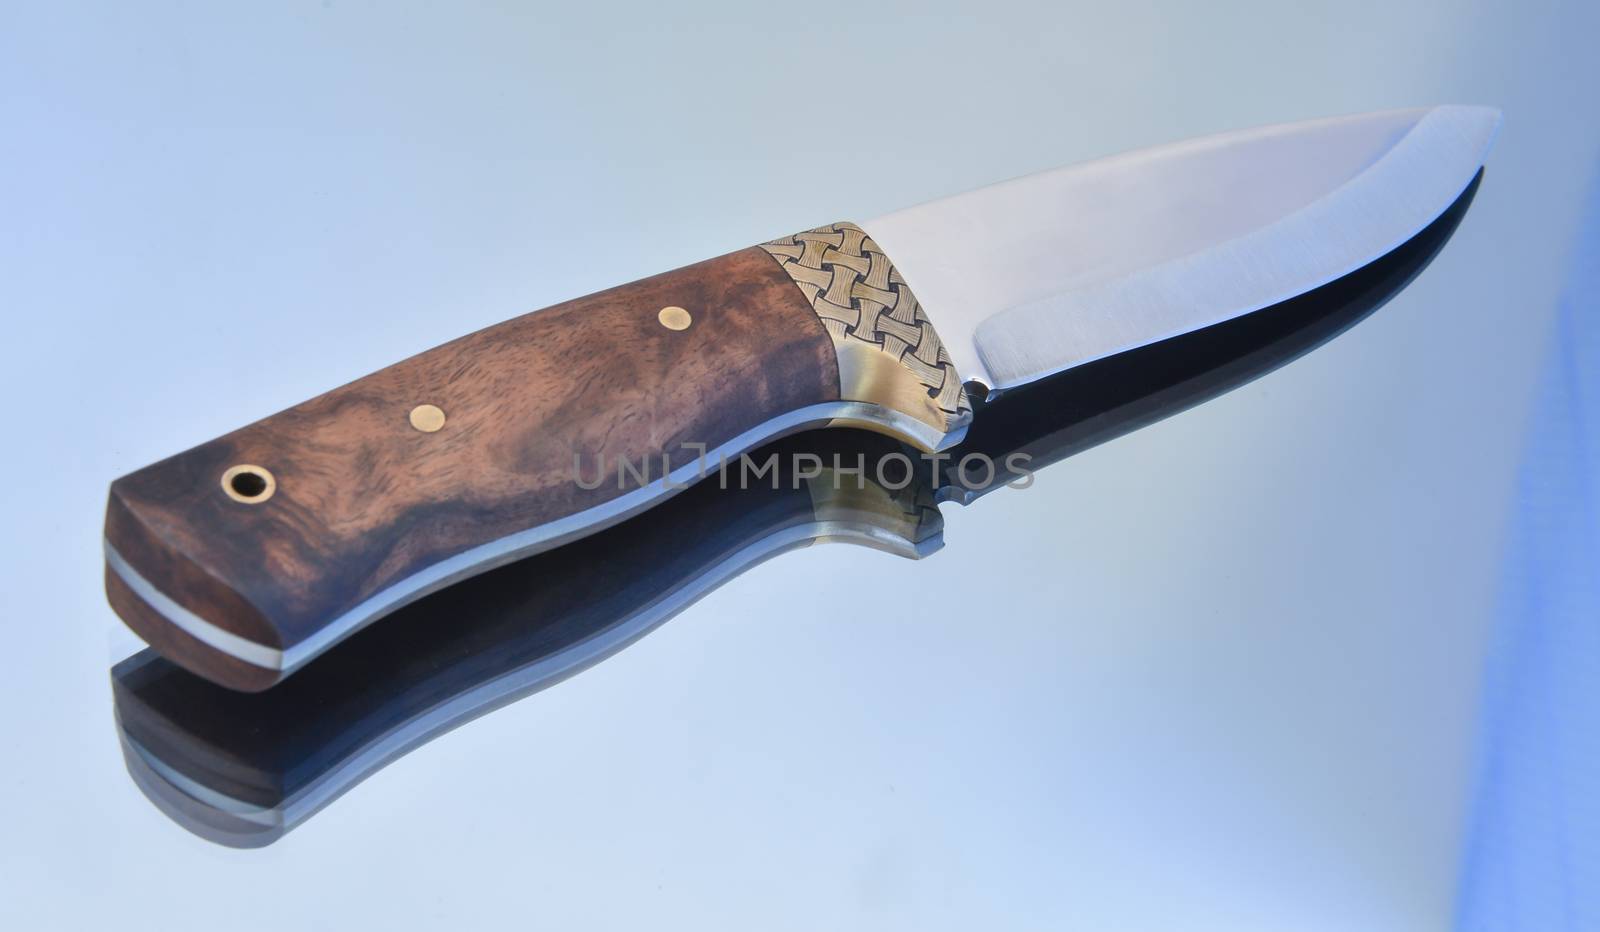 required for hunting and camping-quality knife